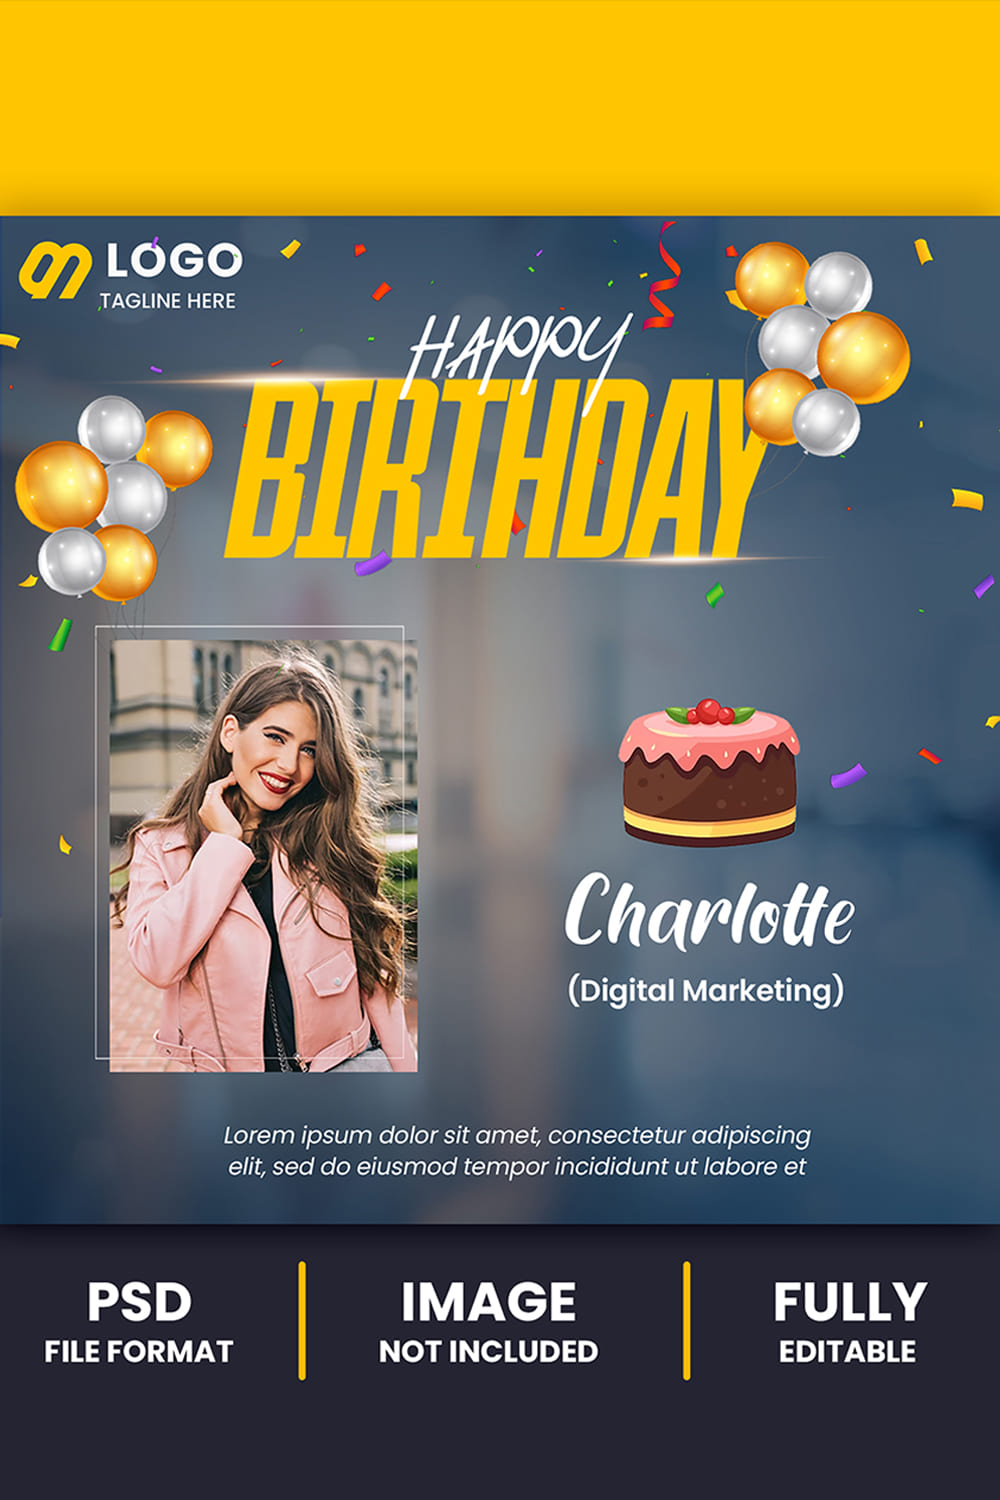 PSD Happy birthday celebration corporate social media instagram poster high quality pinterest preview image.